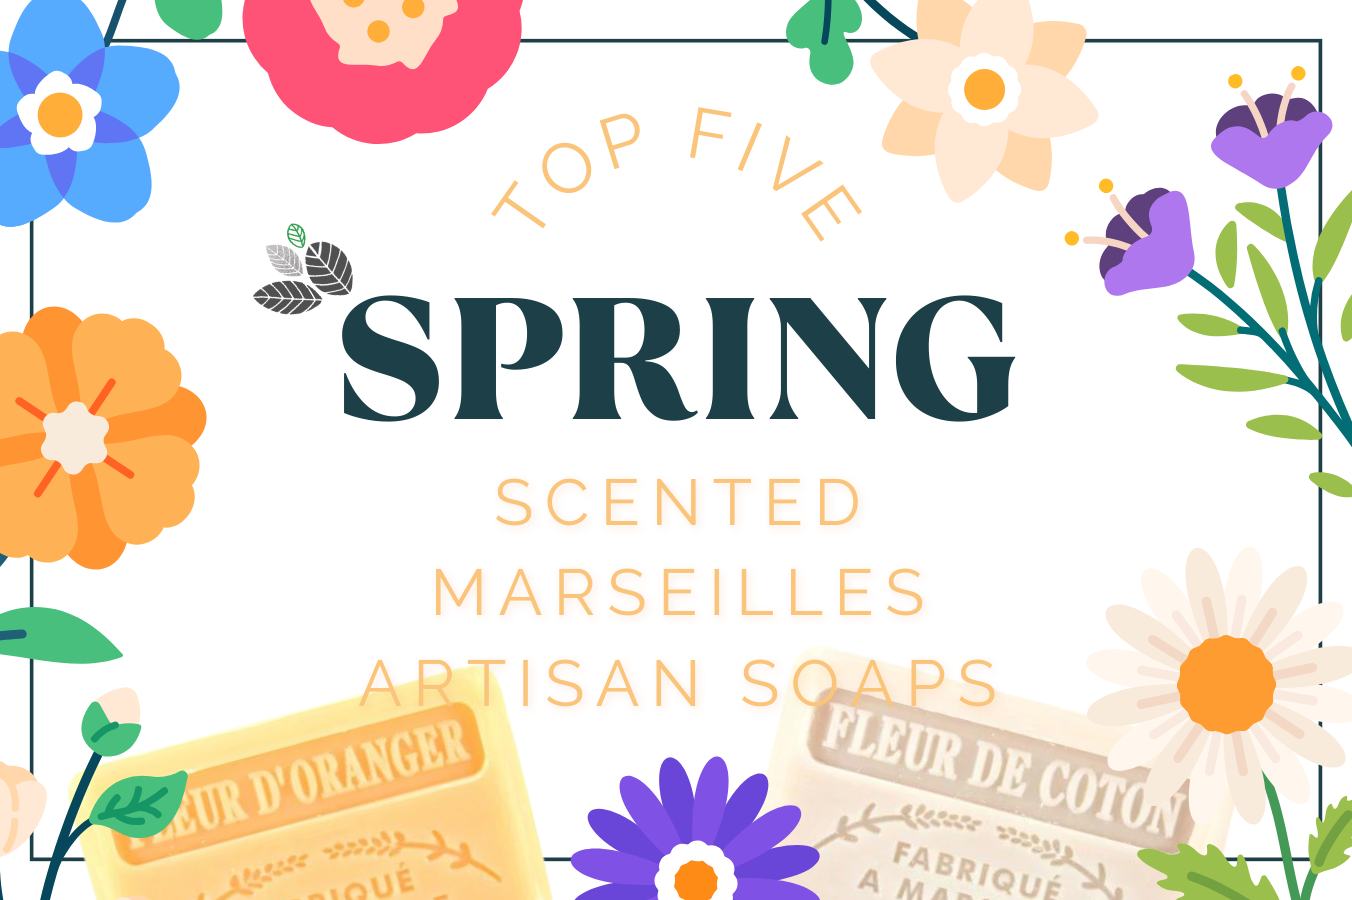 Marseilles soaps: Discover our Top Five Spring Scented Soaps